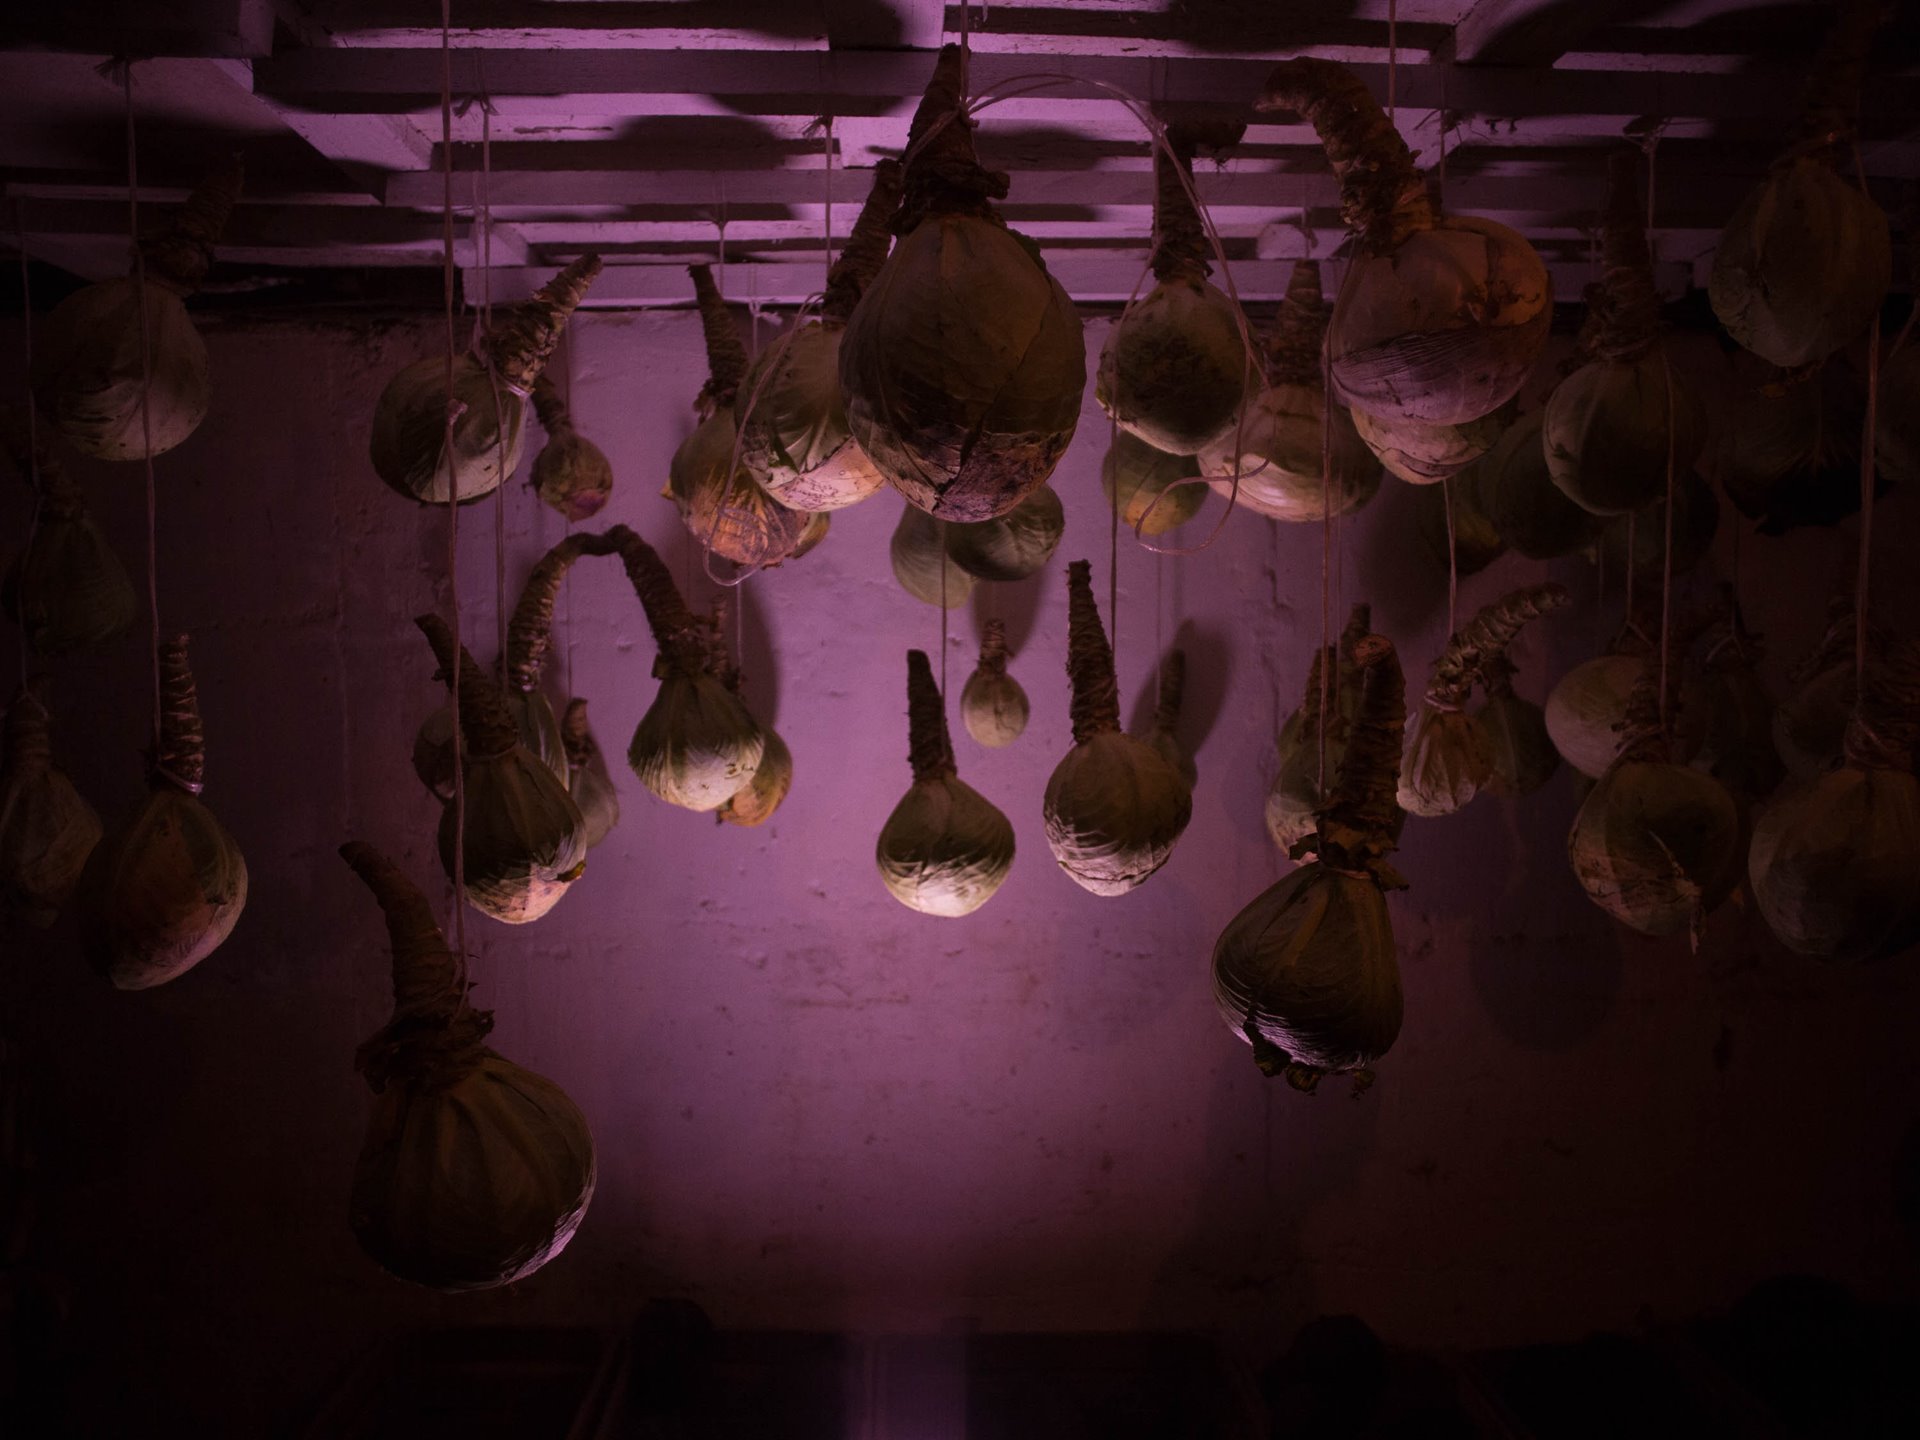 Cabbages hang stored in a cellar in Svetlana village. Residents grow their own vegetables, working hard in the summer months to store enough to last the winter. They also produce cheese, cottage cheese, and enough milk for themselves and to sell to their neighbors.